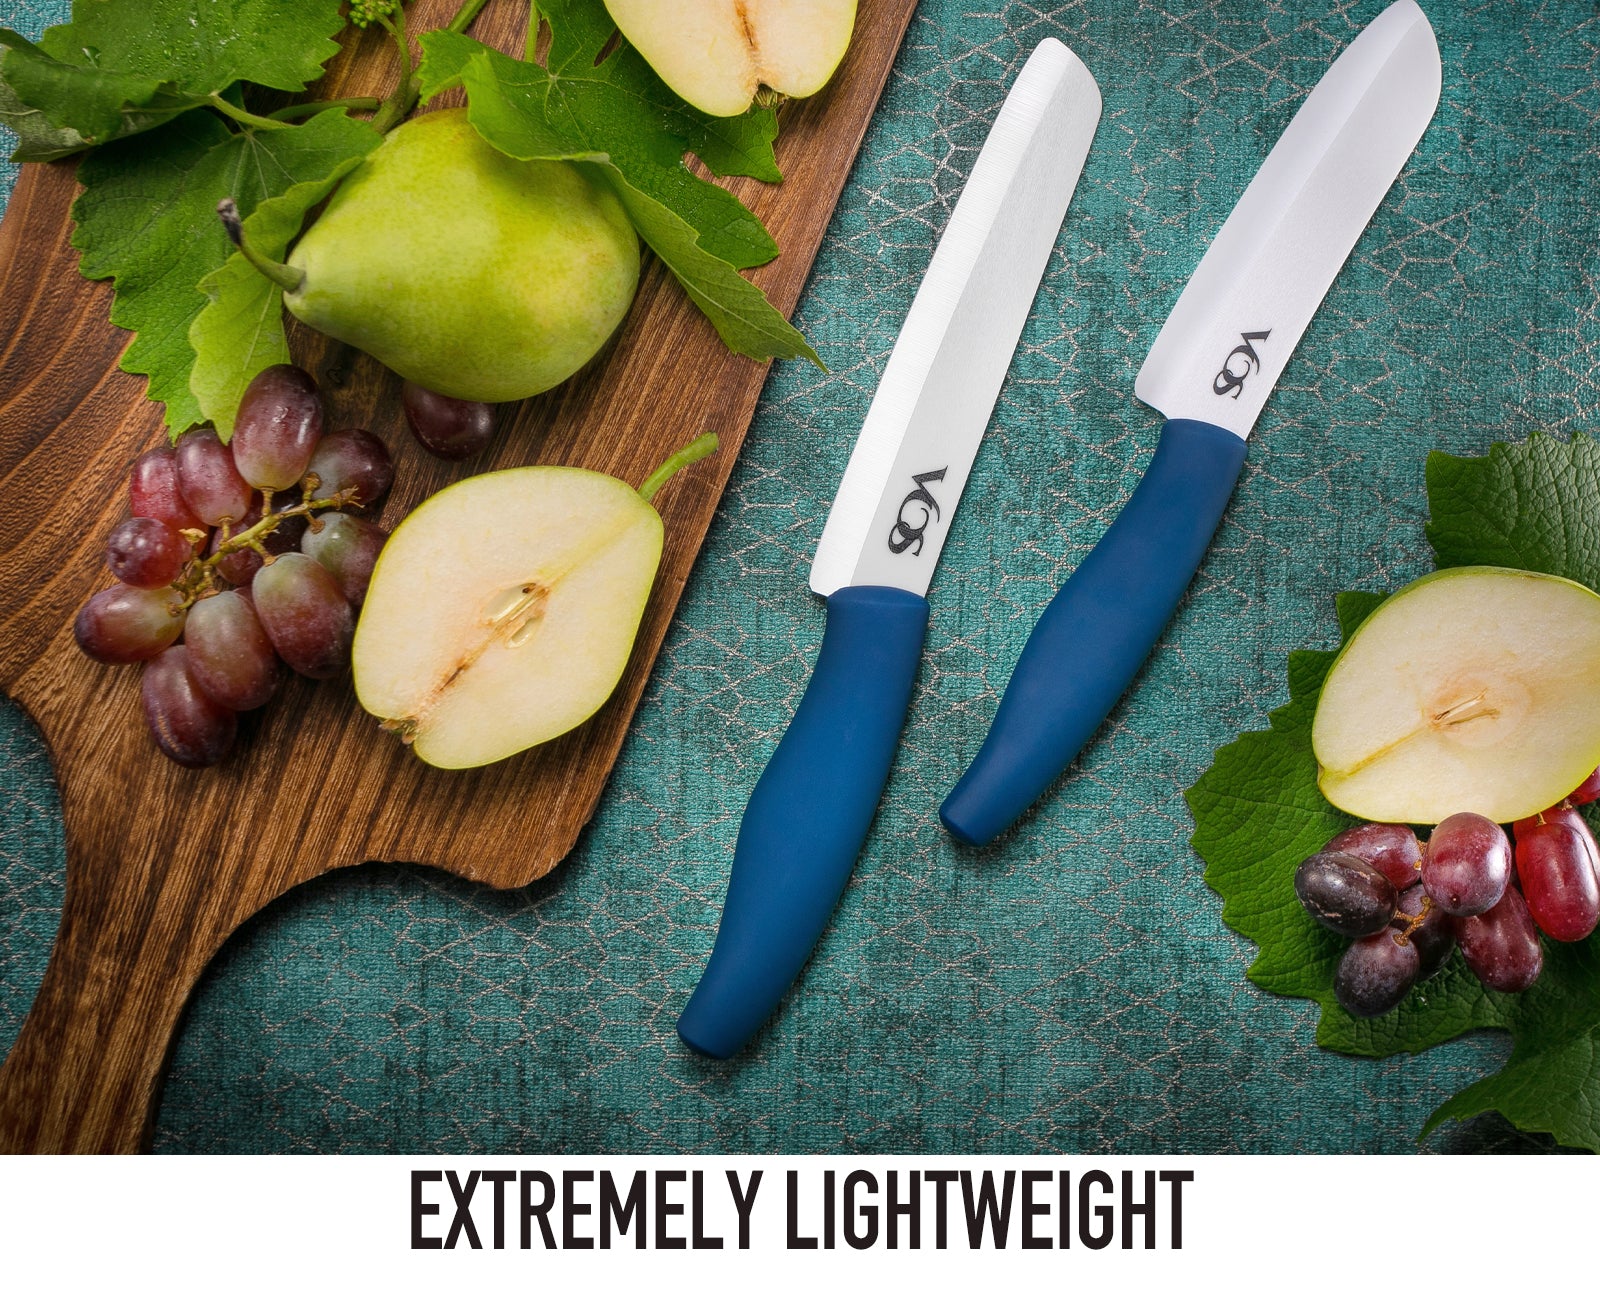 Myvit Ceramic Knives with Sheaths Covers 6 Kitchen Chef Knife 3 4 5  Paring Knife Slicer with Peeler Multicolor Soft-Grip Handle 